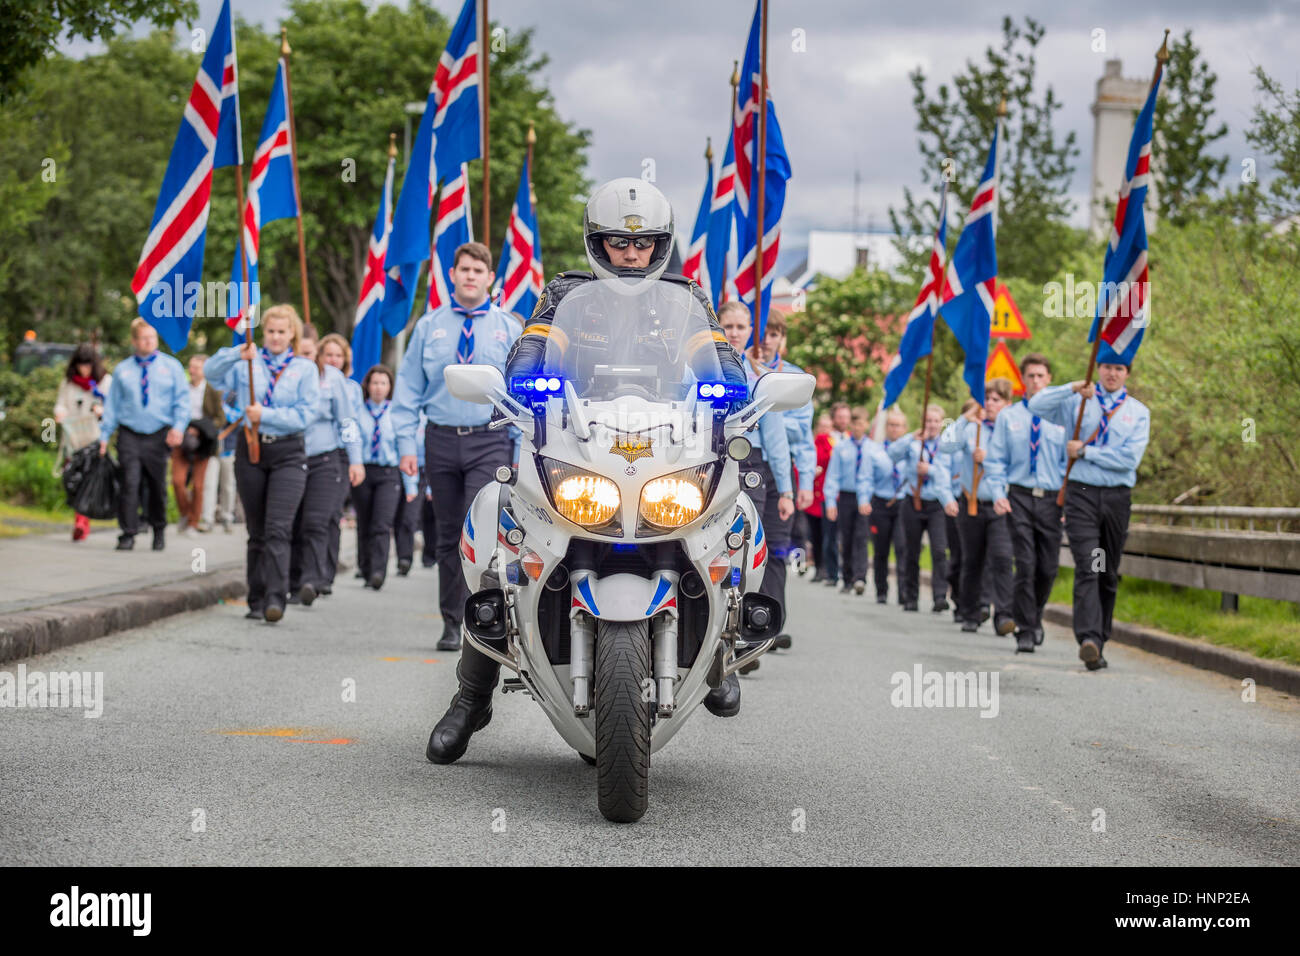 Motorbike leading the Scouts during a parade, Independence day, Reykjavik, Iceland Stock Photo